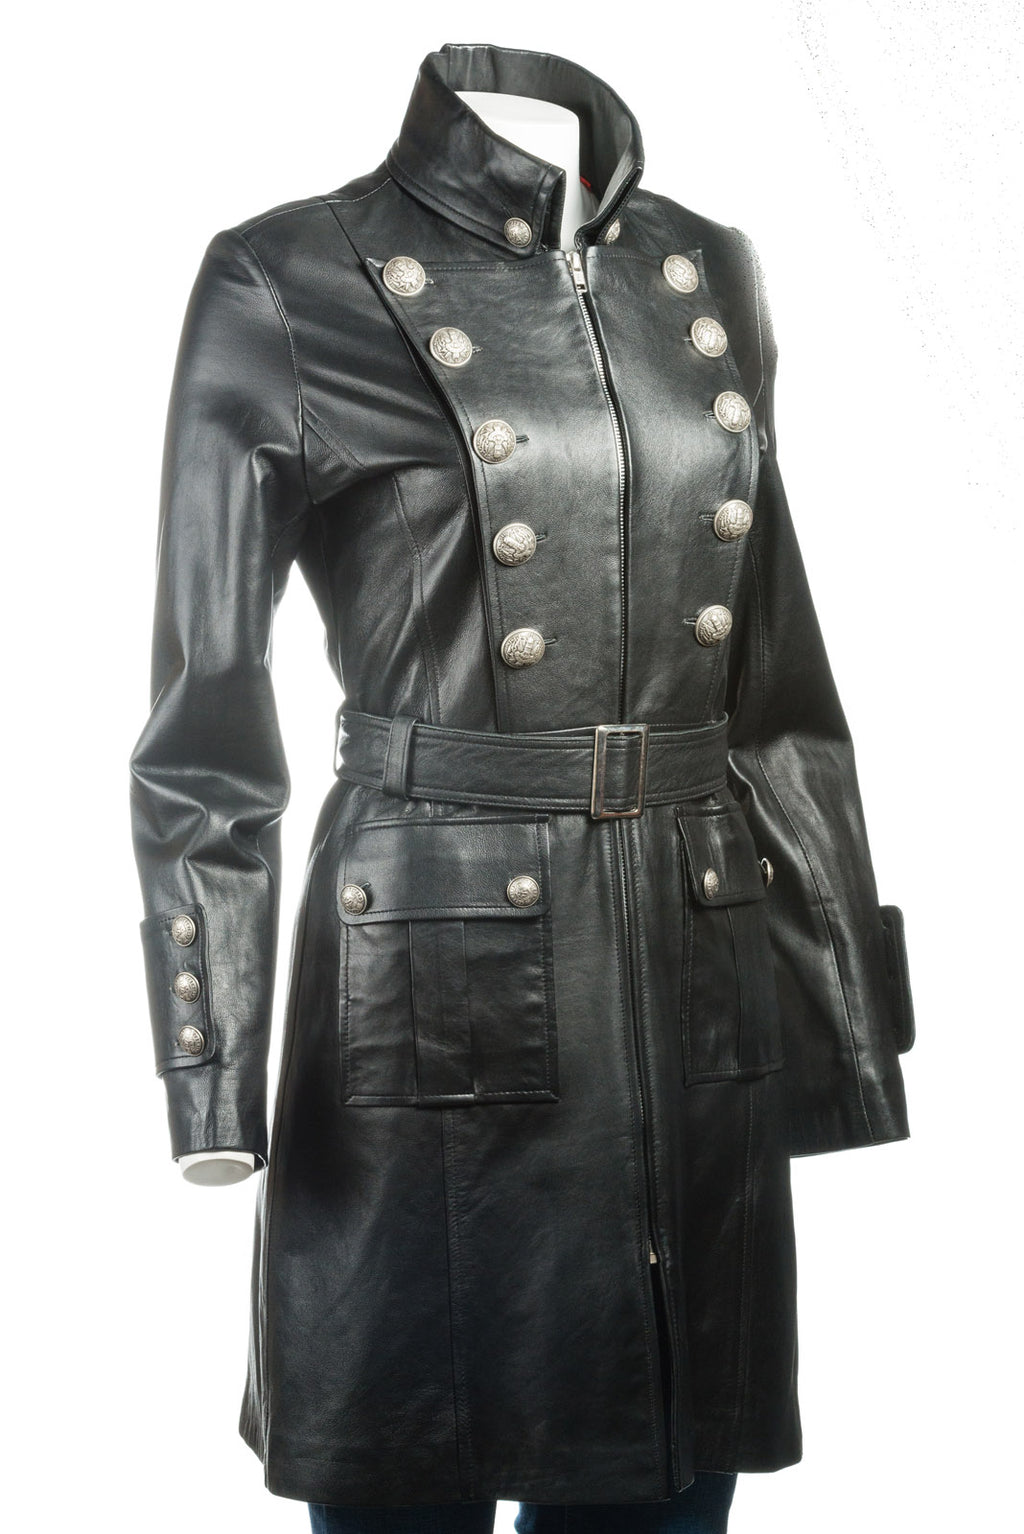 Ladies Three Quarter Length Military Style Leather Coat: Charm Exclusive Military